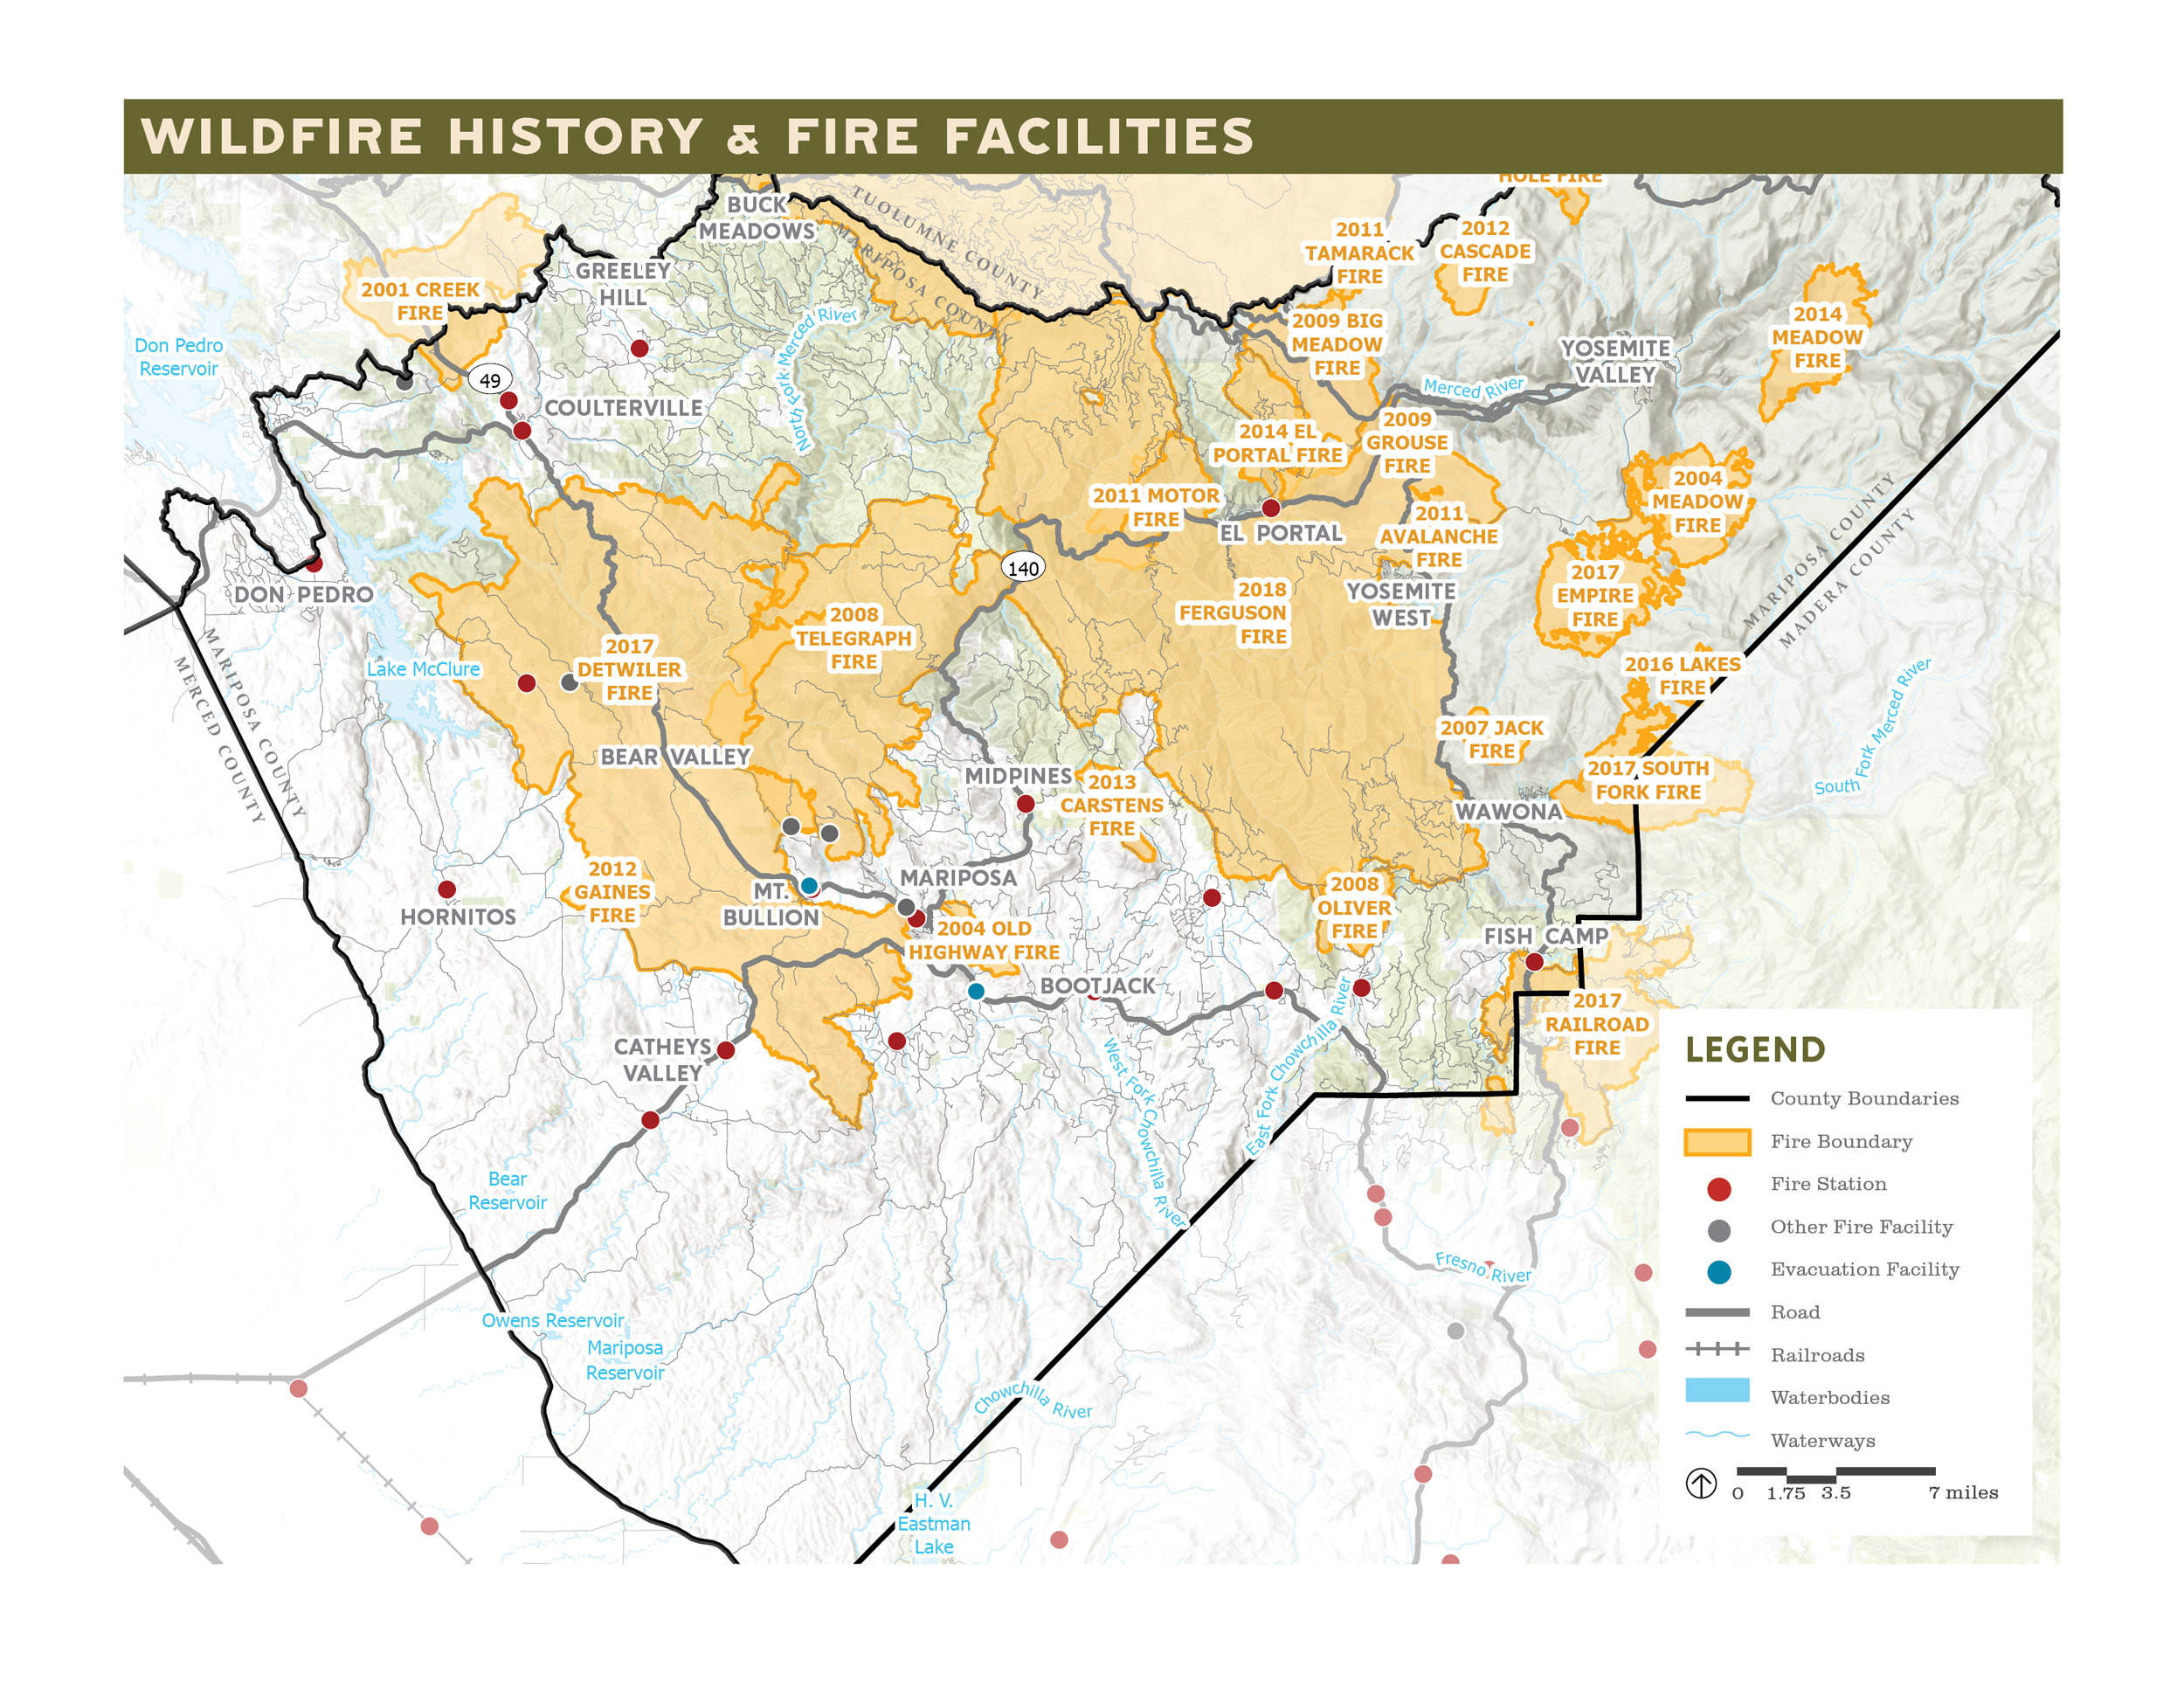 map of mariposa county depicting the county's history of wildfires